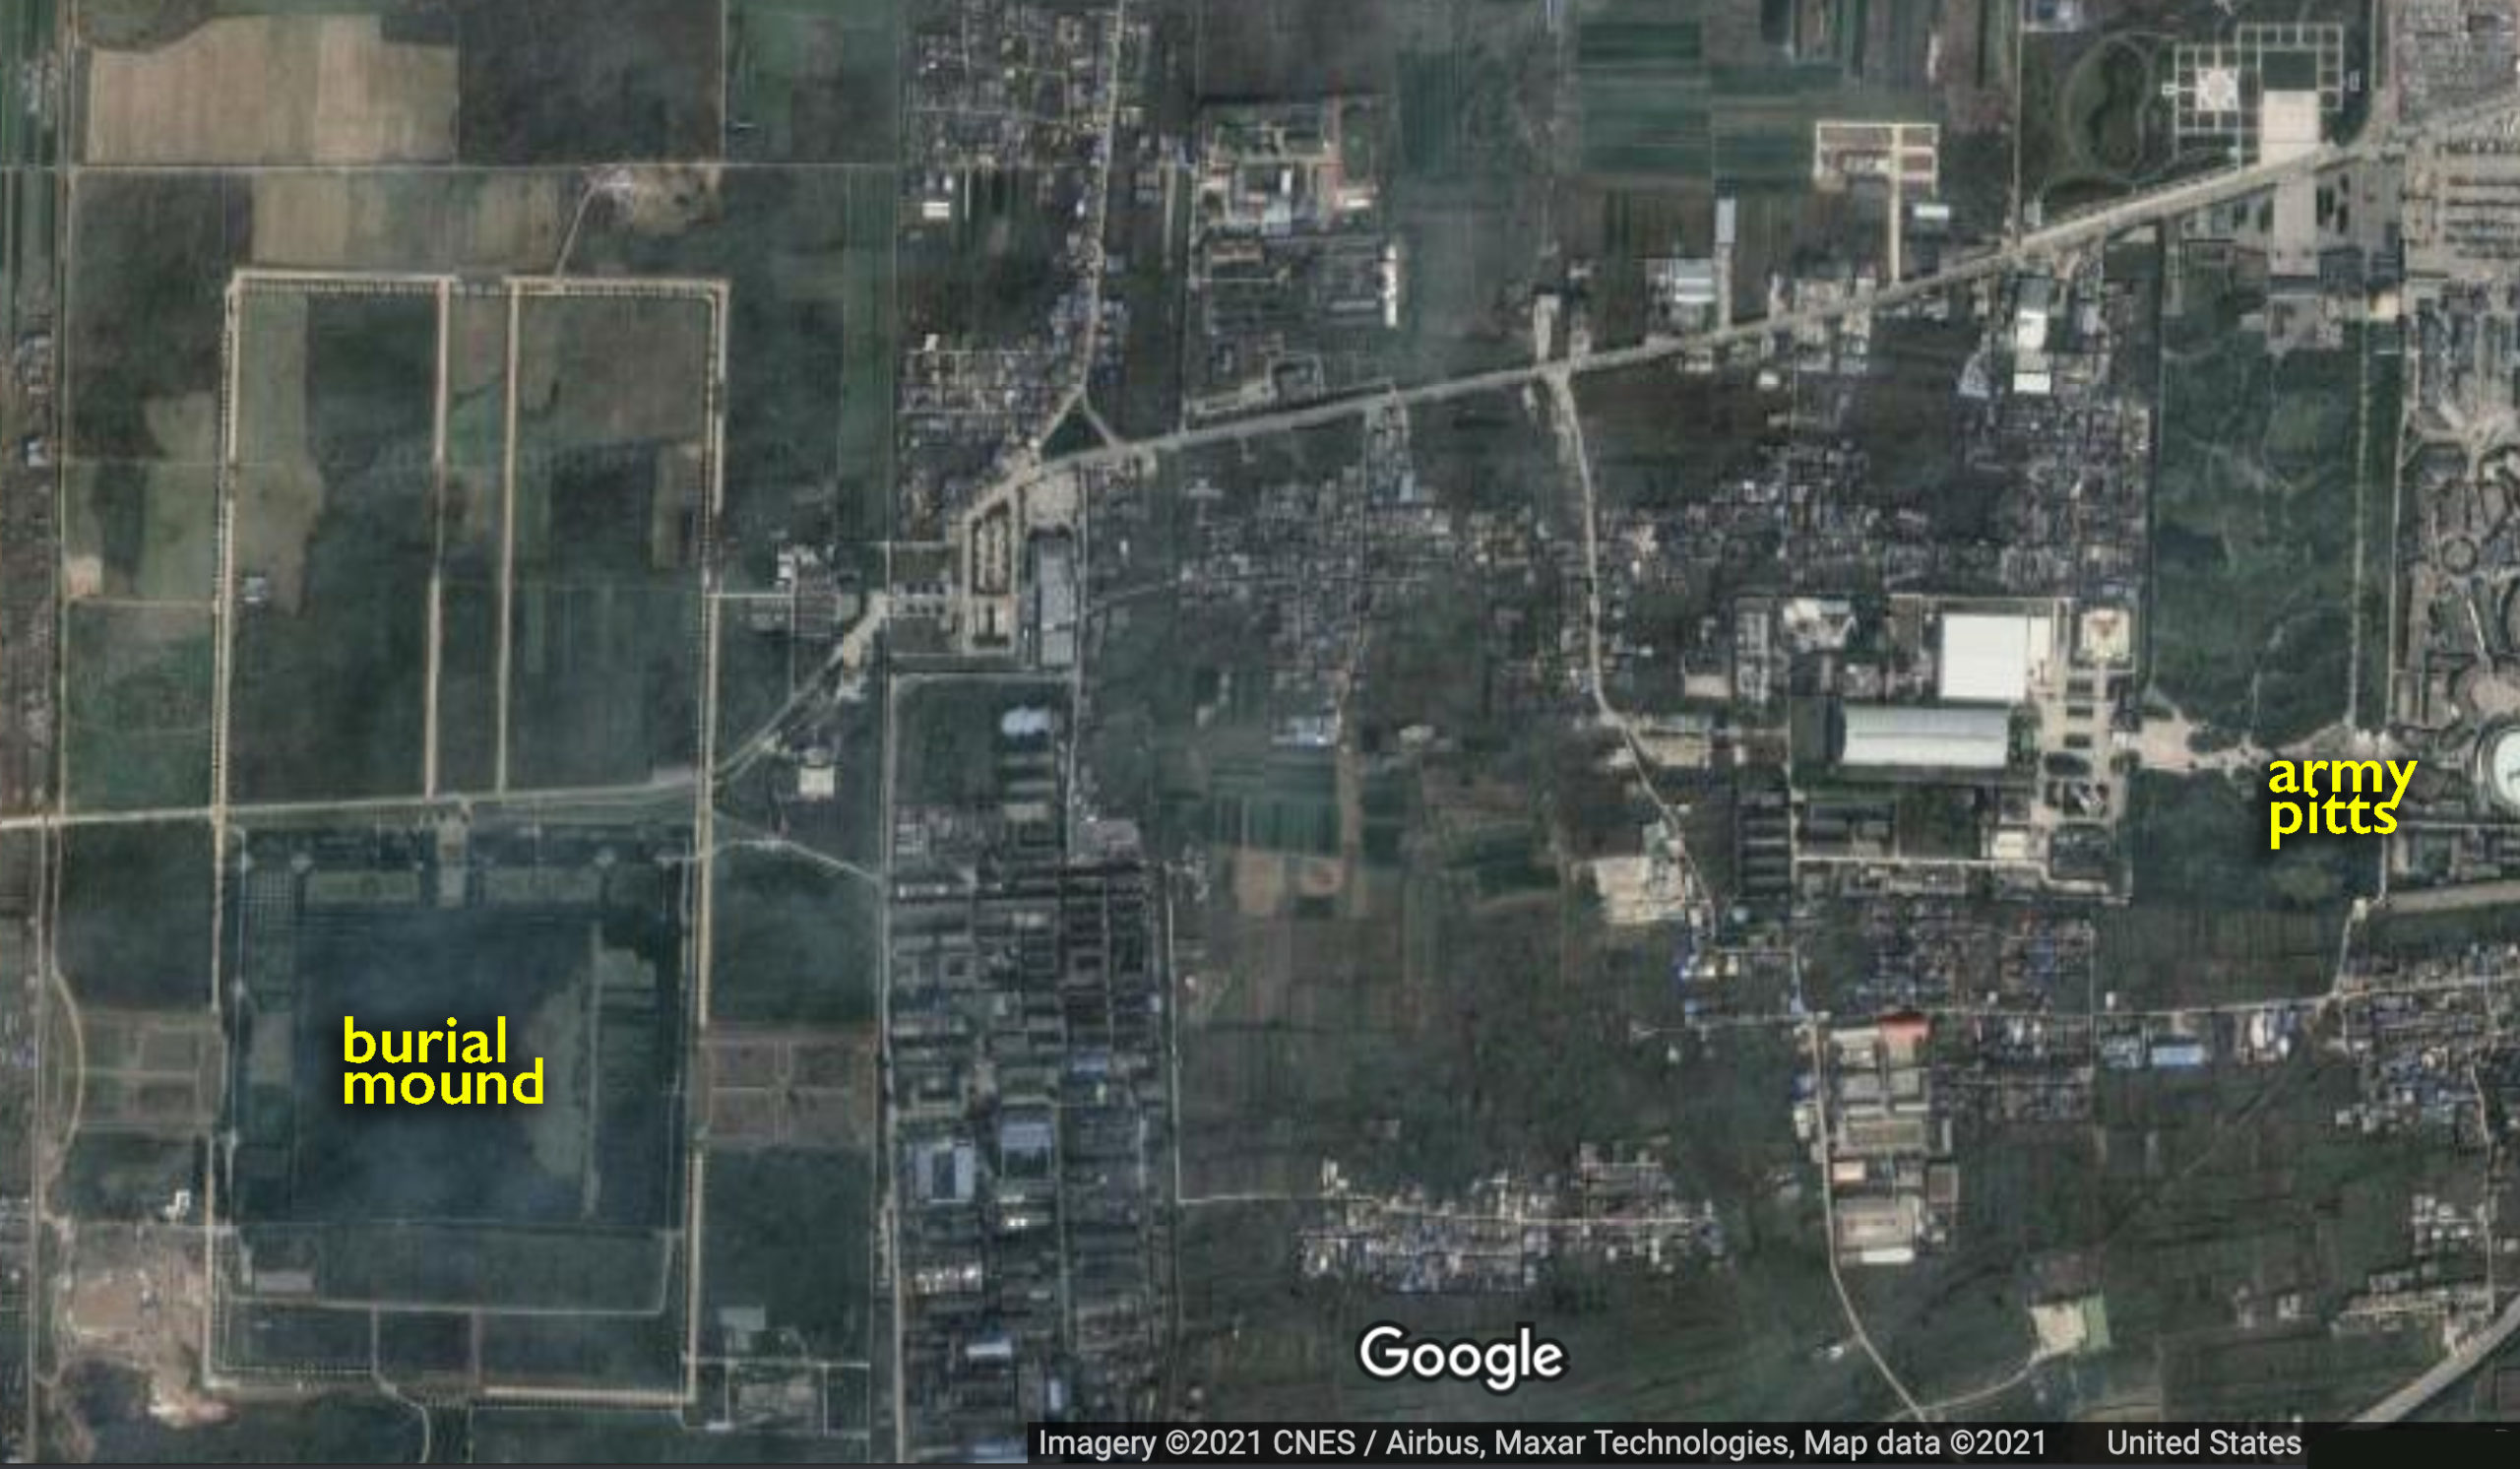 An idea of the size of the complex can be gained when viewing the pyramid-shaped tumulus and the Army Pits, currently the site of the Museum of the Tomb of the First Emperor, which are 1.22 km/0.75 miles away from each other (underlying map © Google)